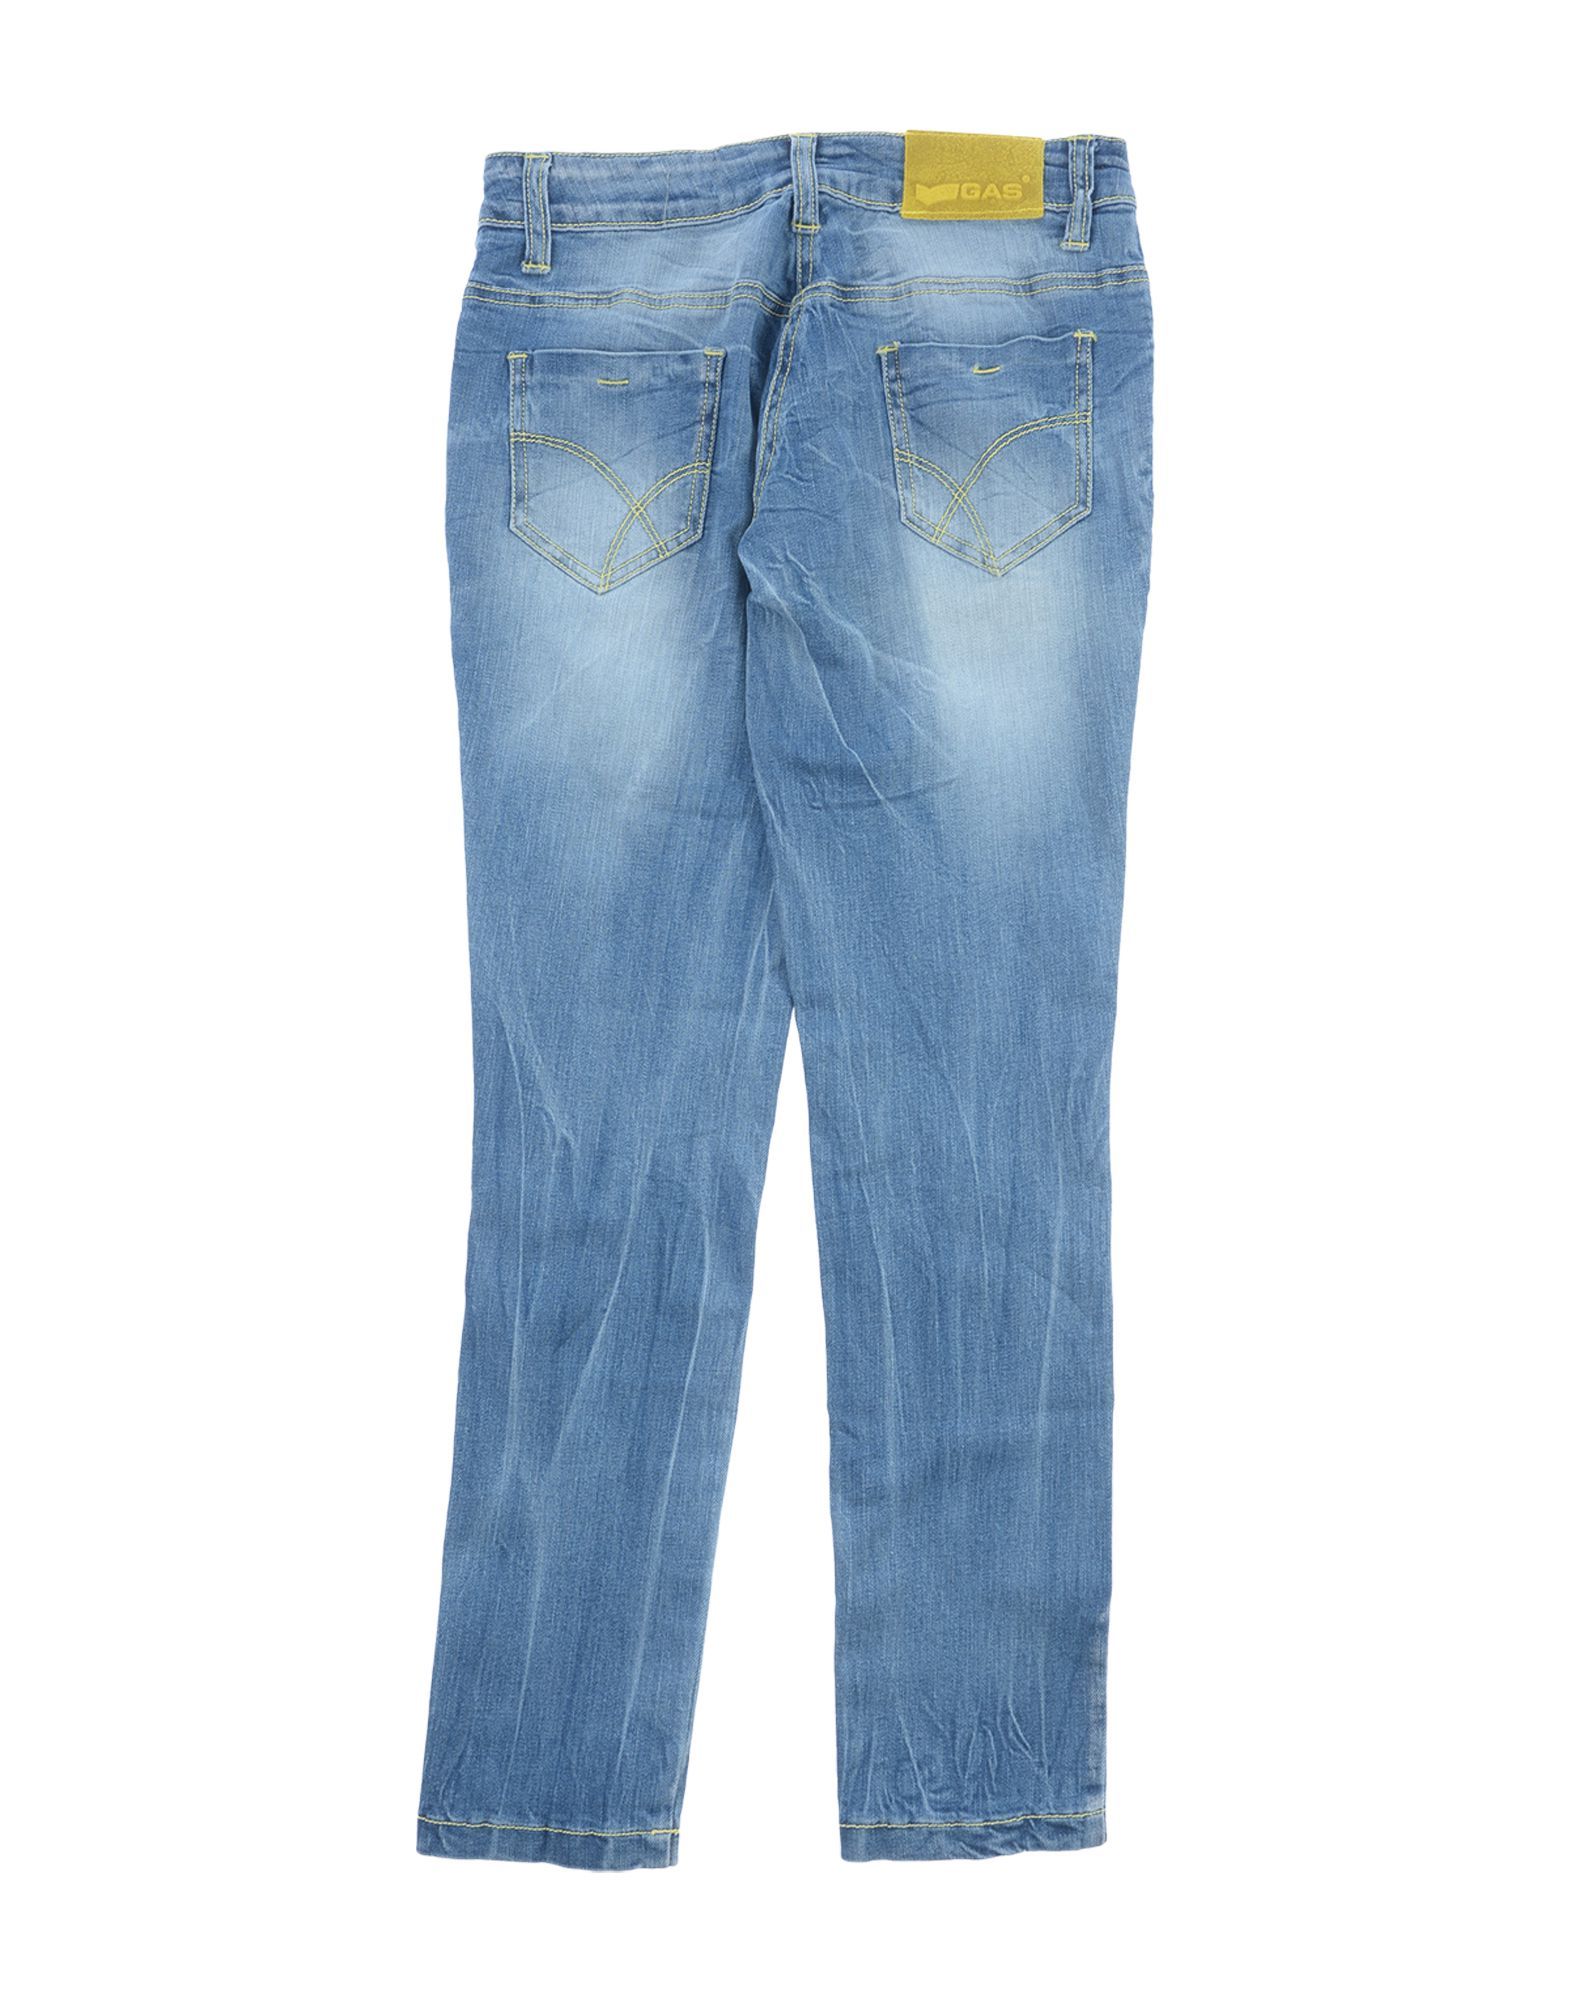 denim, faded, leather applications, solid colour, medium wash, mid rise, front closure, button, zip, multipockets, stretch, wash at 30� c, dry cleanable, iron at 110� c max, do not bleach, do not tumble dry, contains non-textile parts of animal origin, straight-leg pants